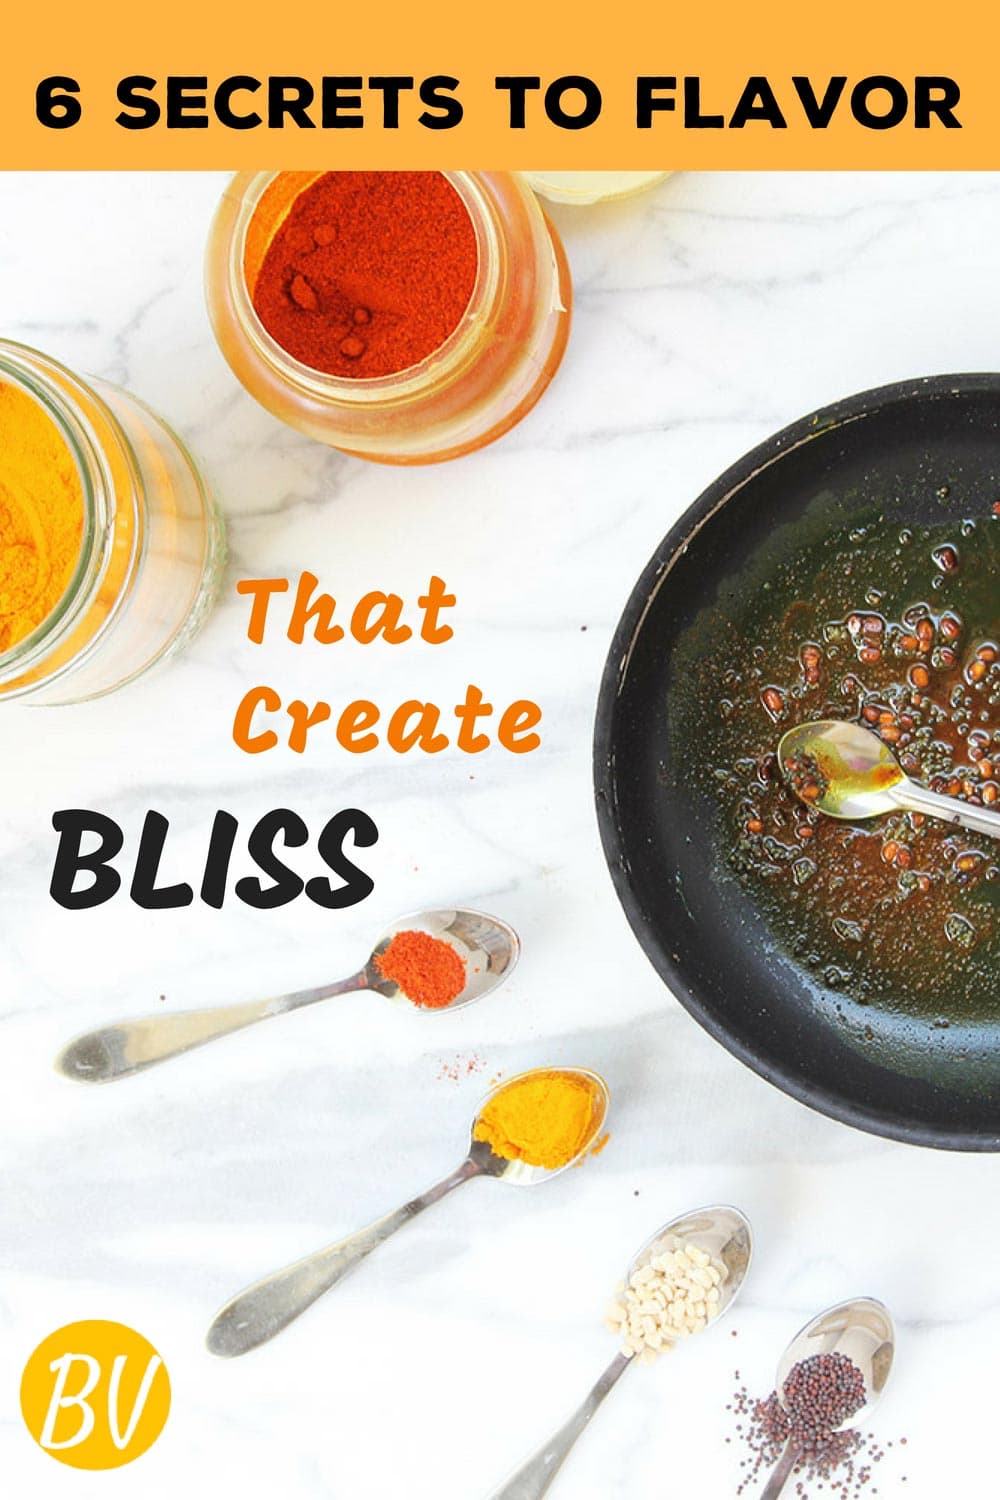 6 Secrets to Flavor That Make Eating Blissful